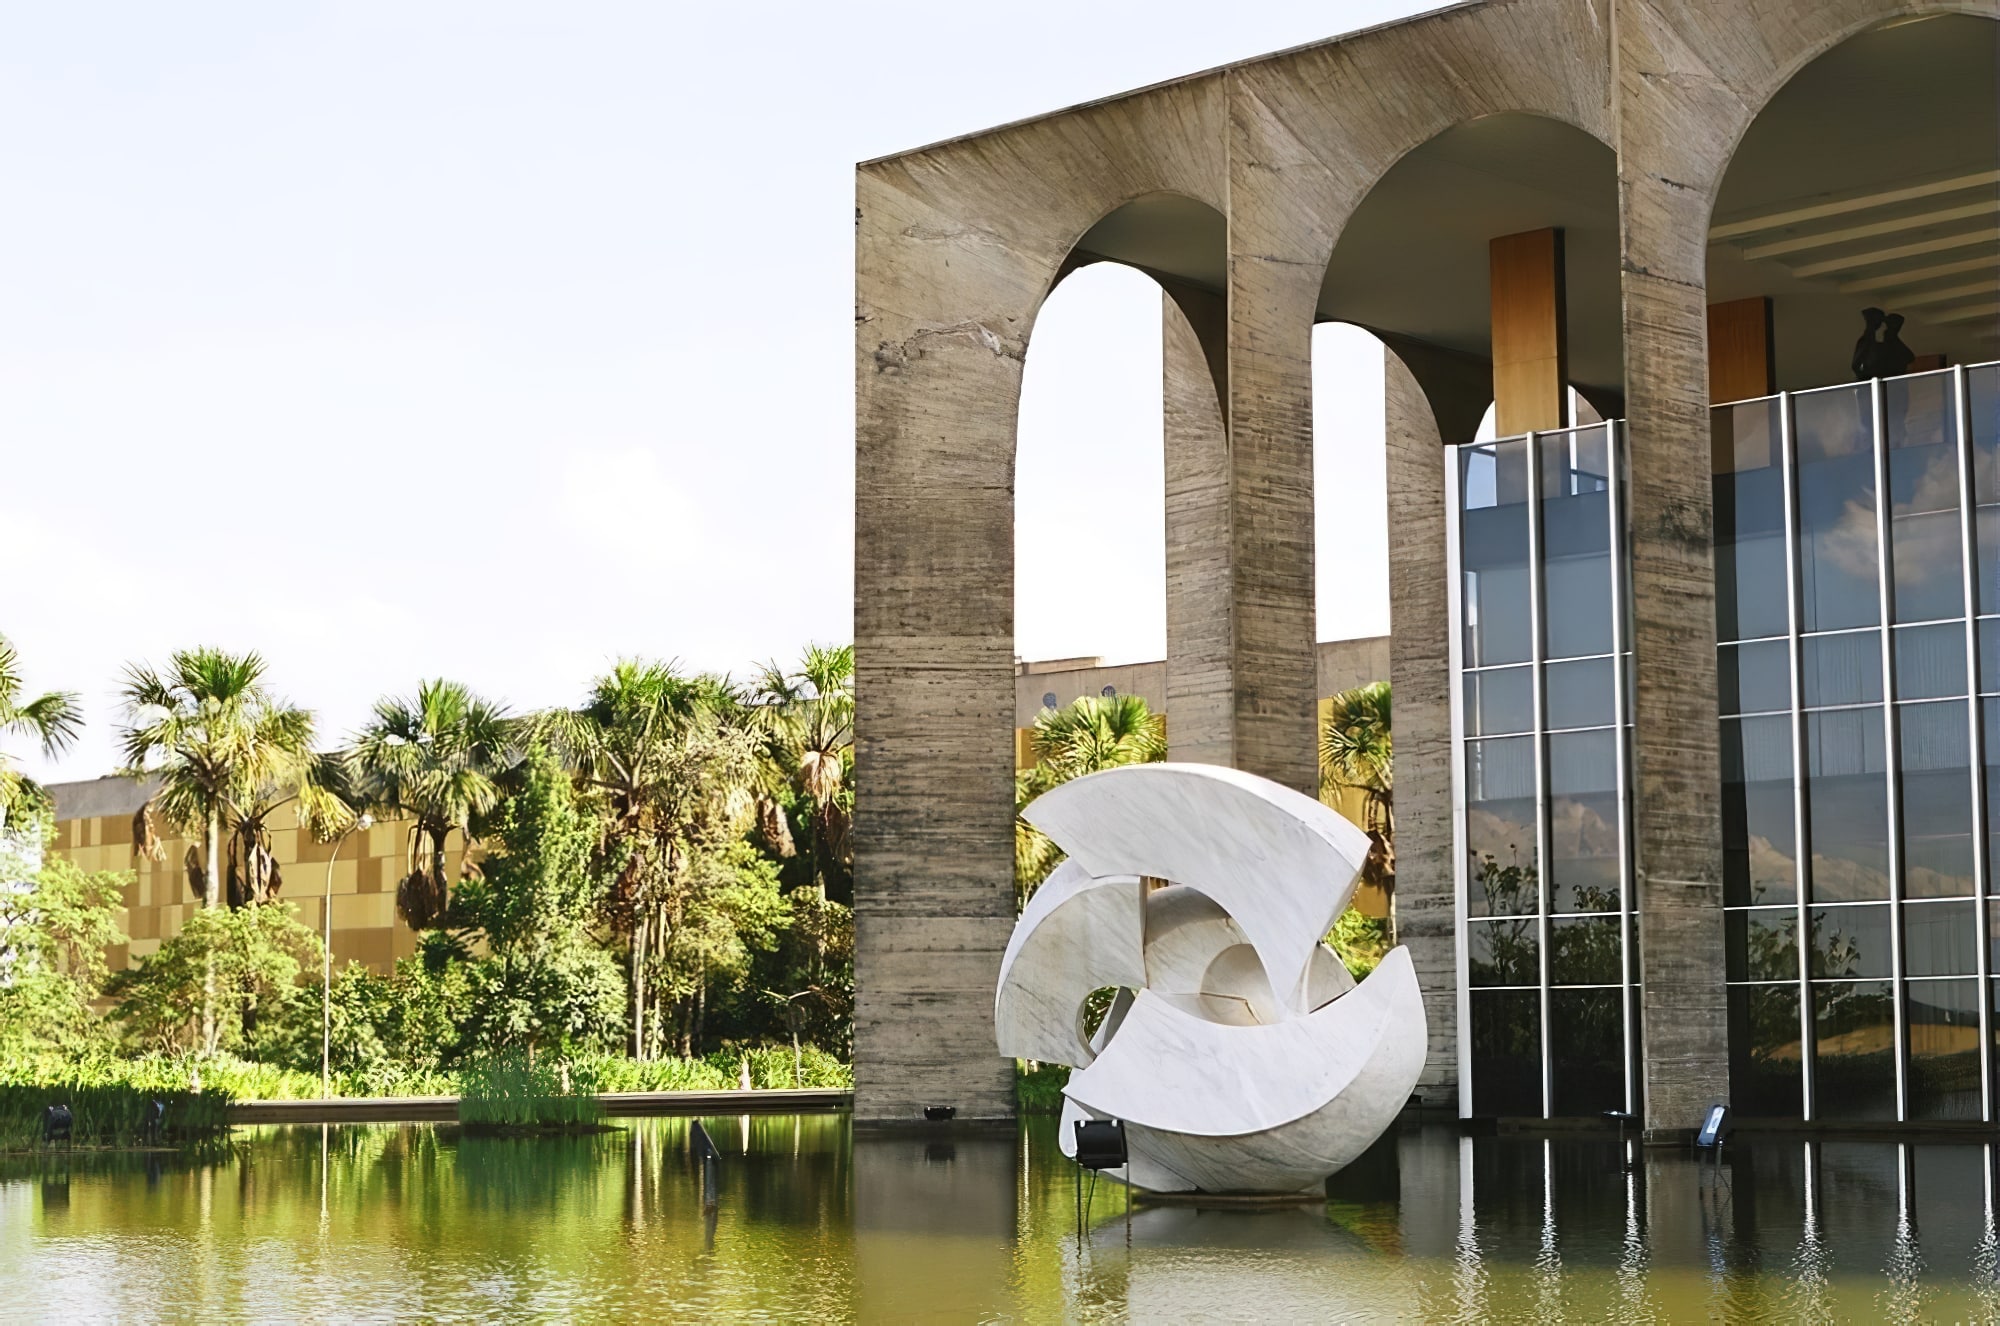 Discover where to stay in Brasilia?